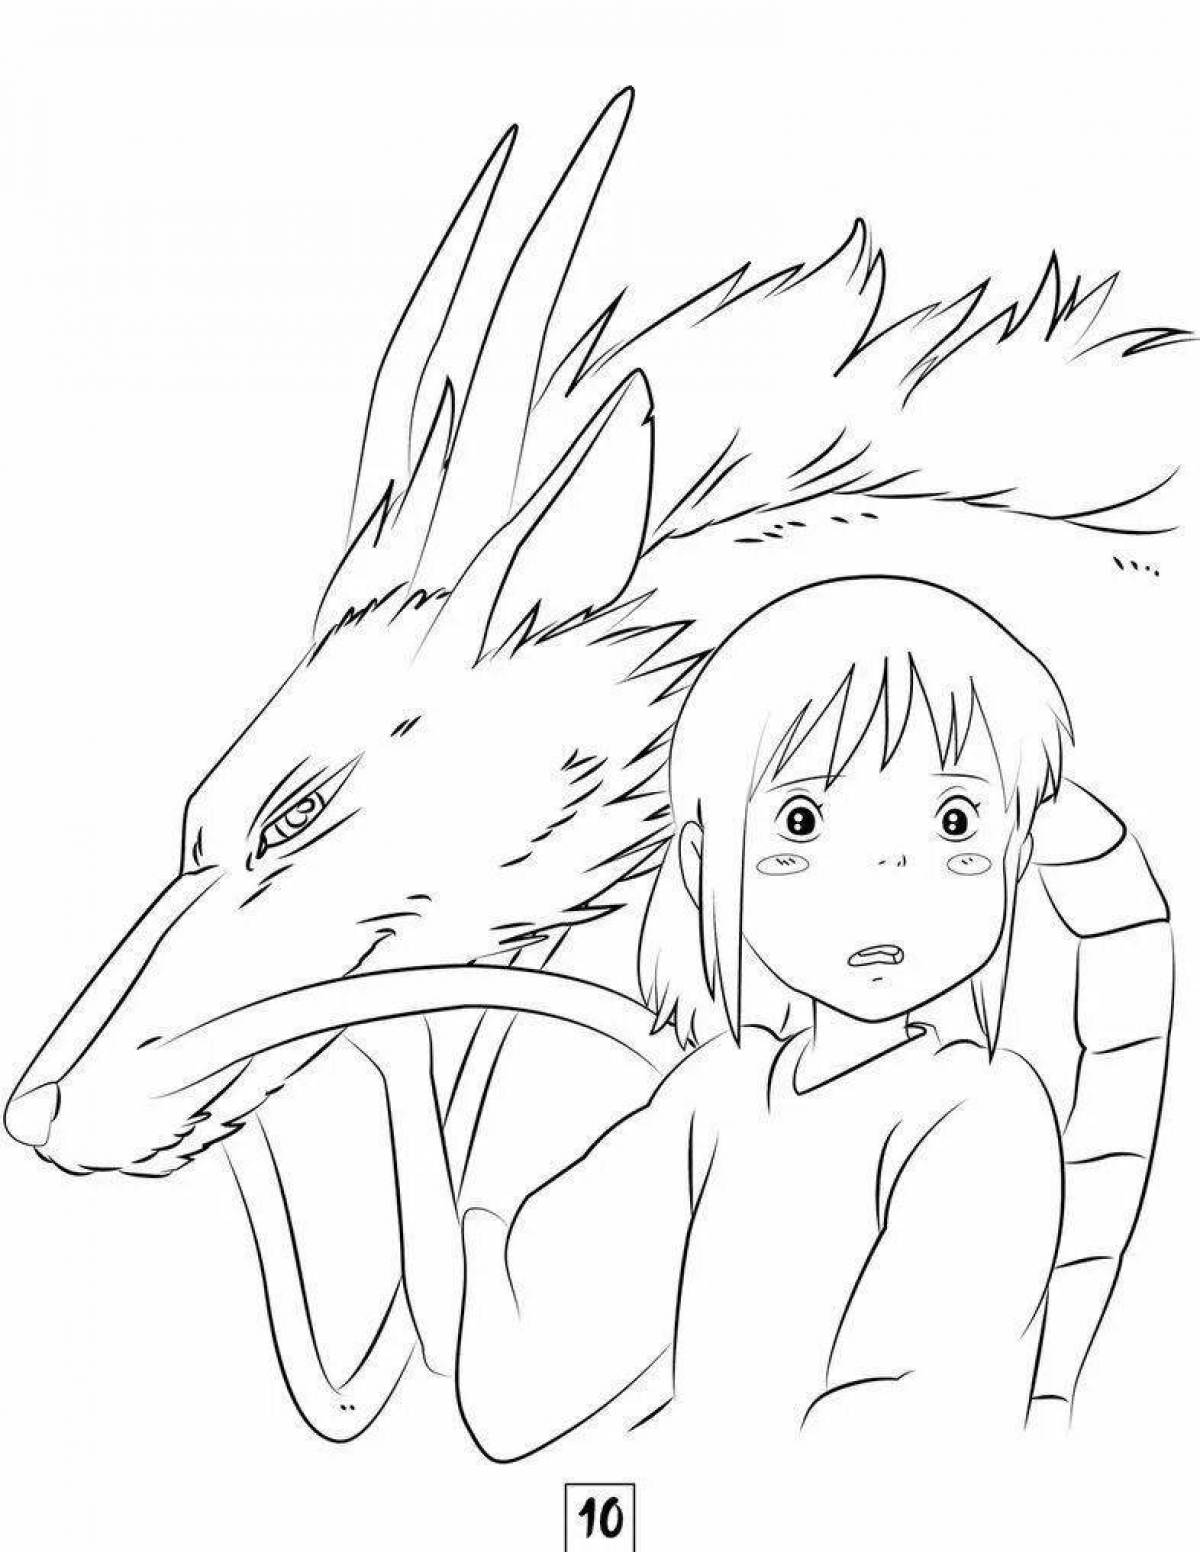 Anime spirited away quirky coloring book